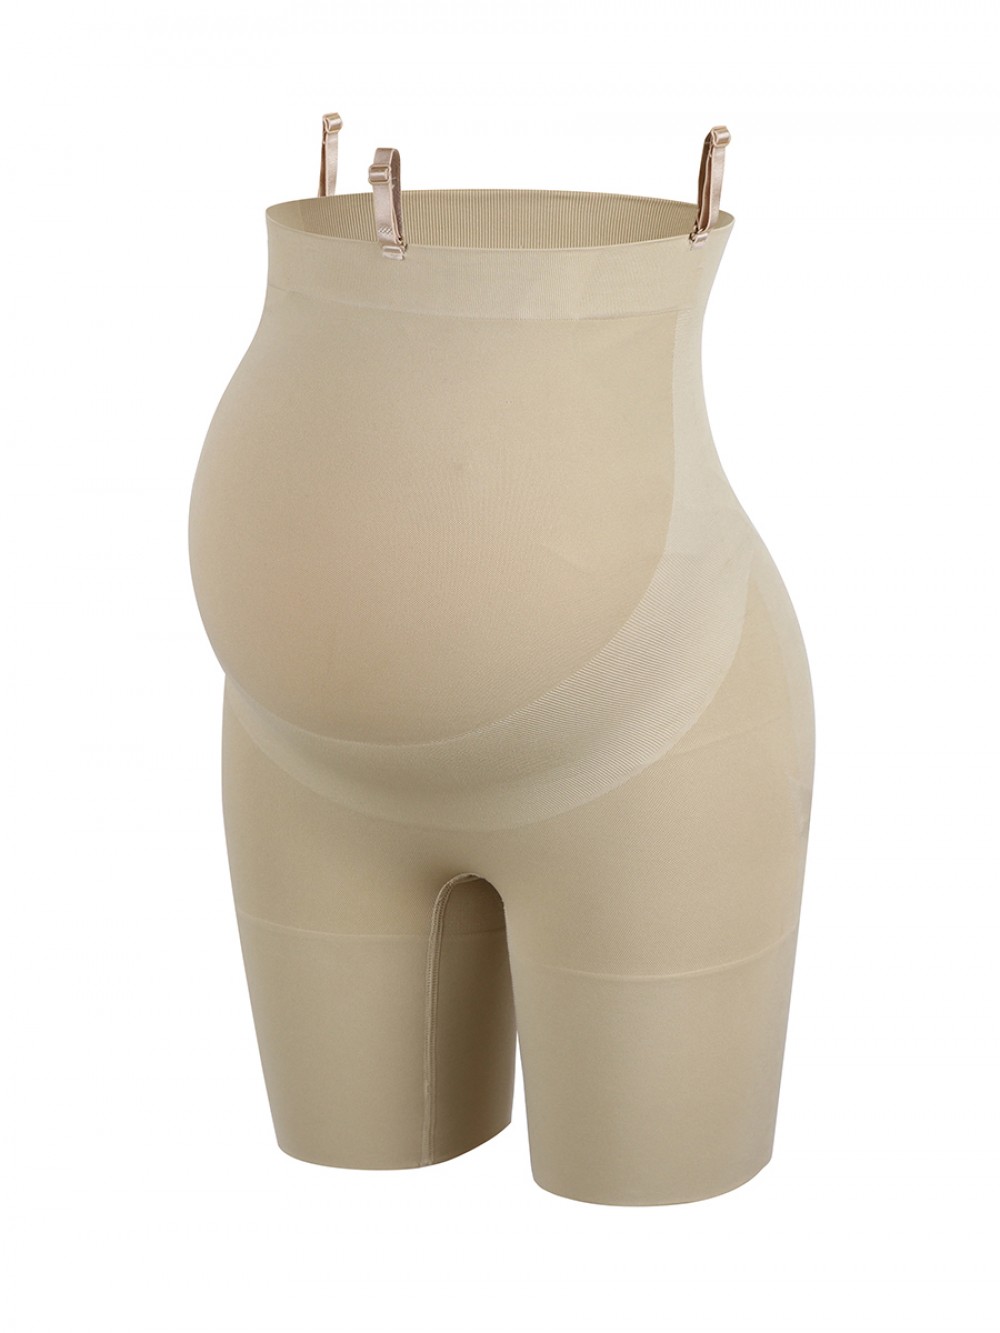 Moderate Control Skin Color Large Size Postpartum Shaper Buckles